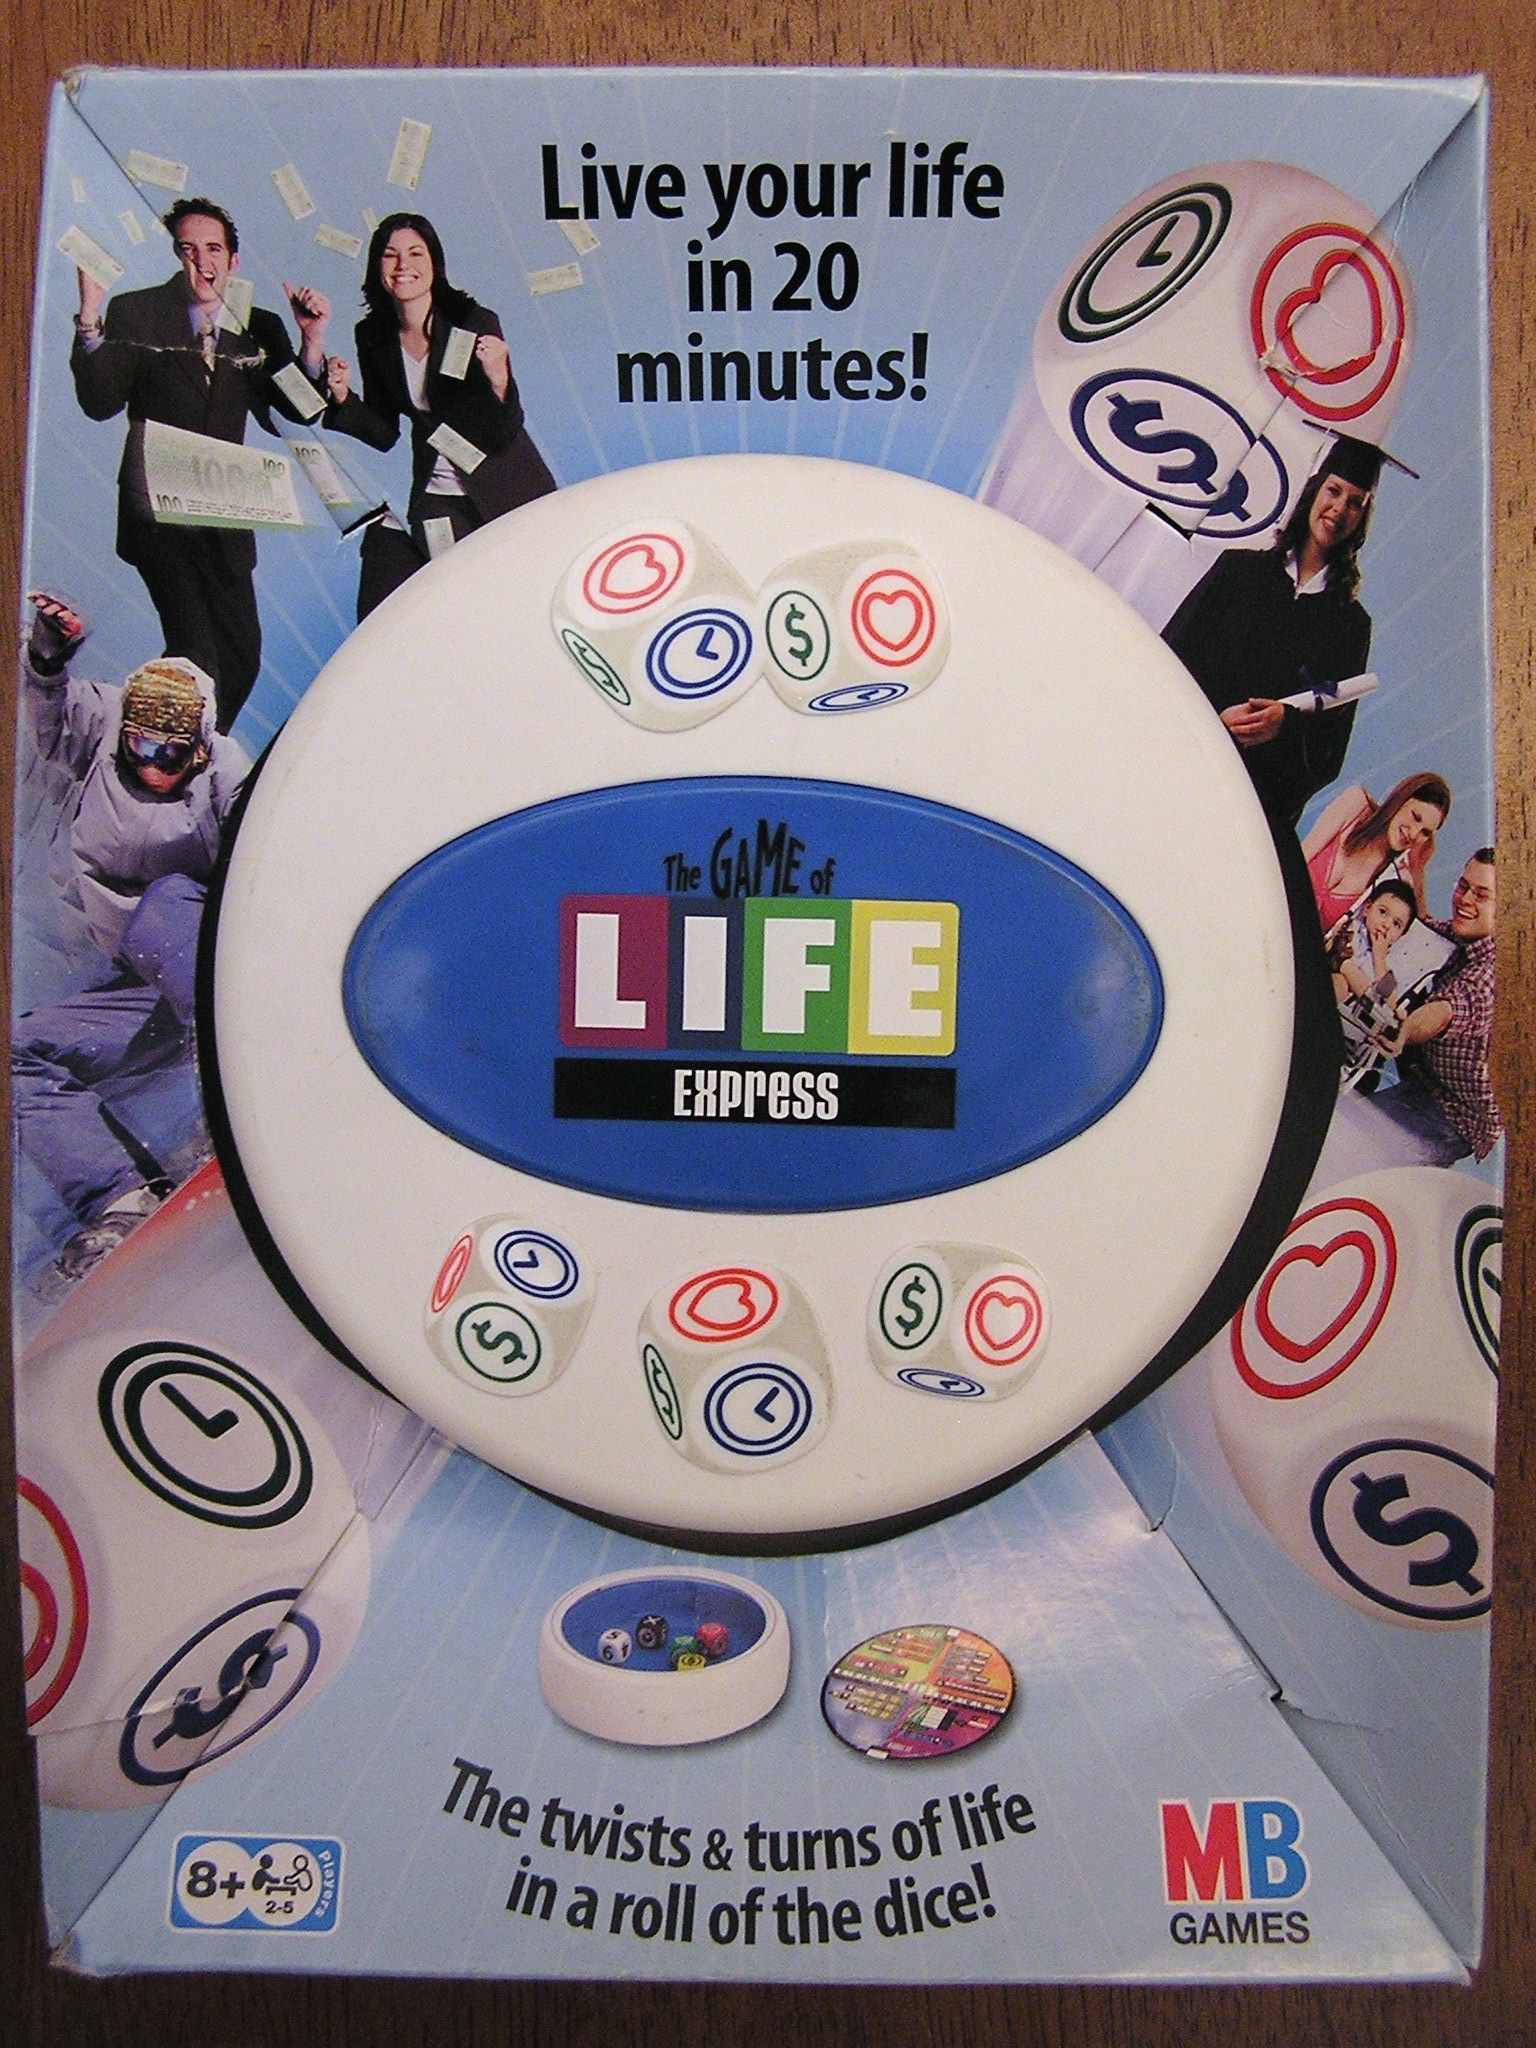 The Game of Life Express